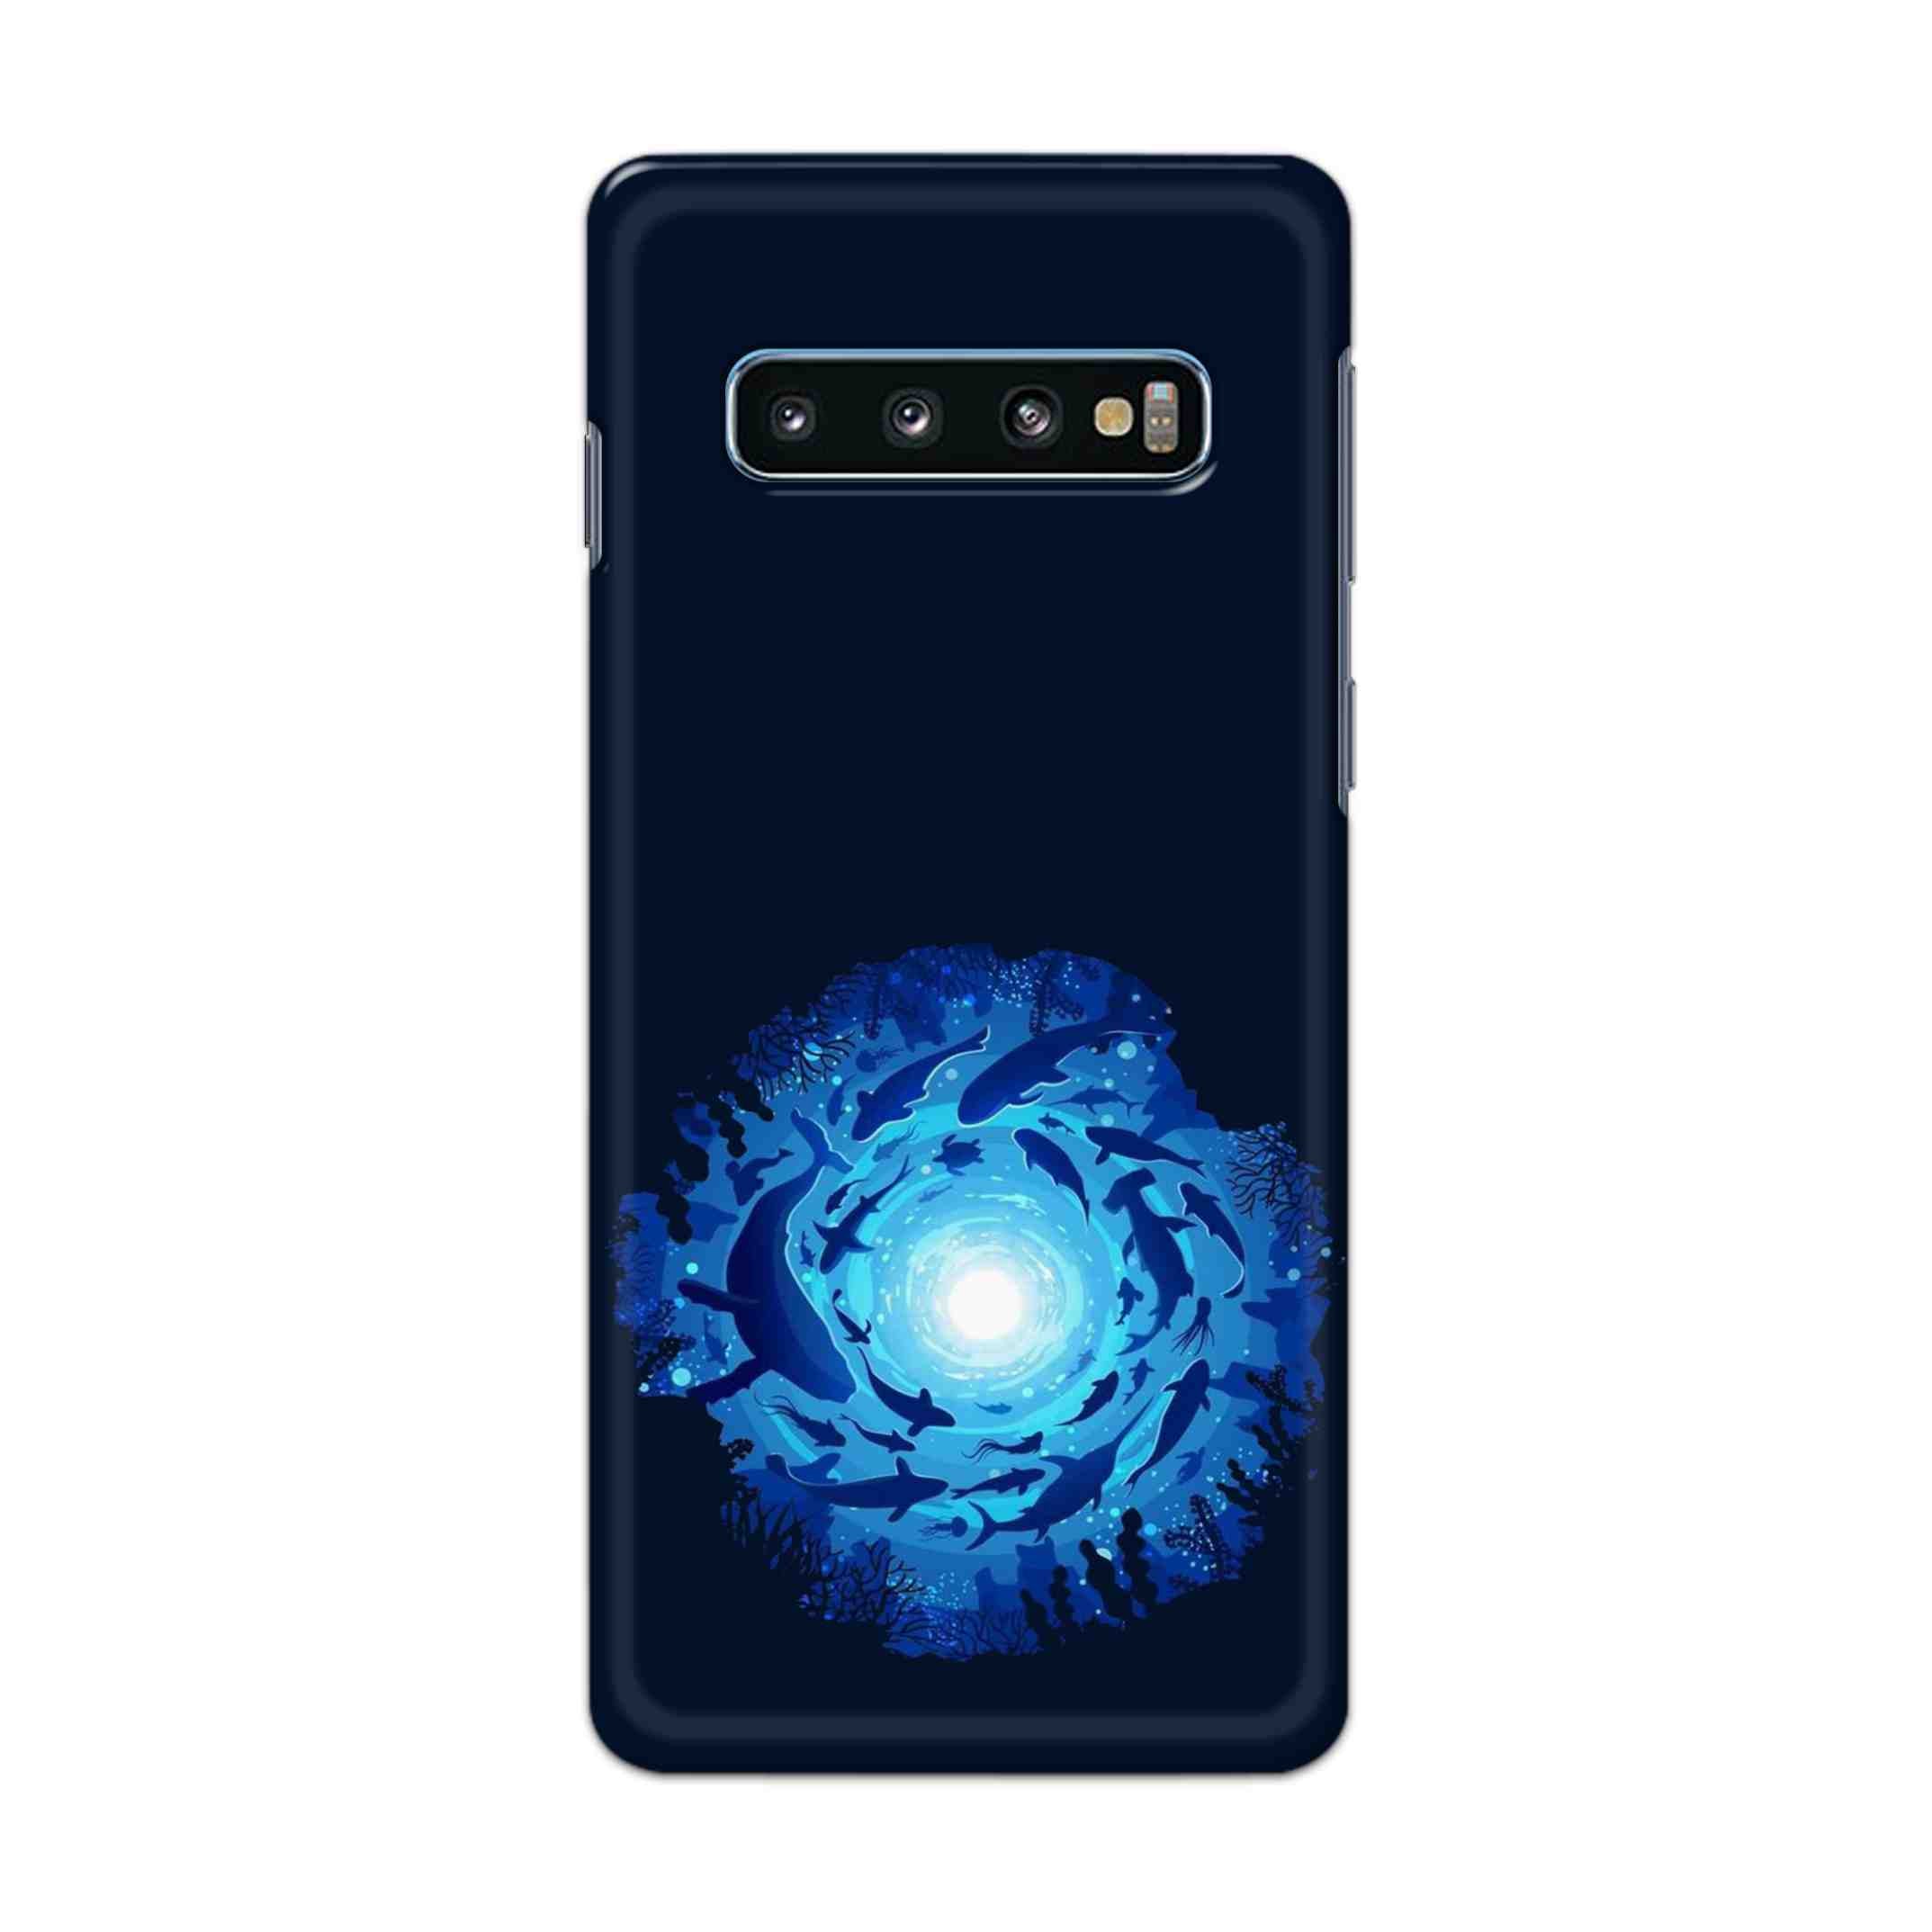 Buy Blue Whale Hard Back Mobile Phone Case Cover For Samsung Galaxy S10 Plus Online